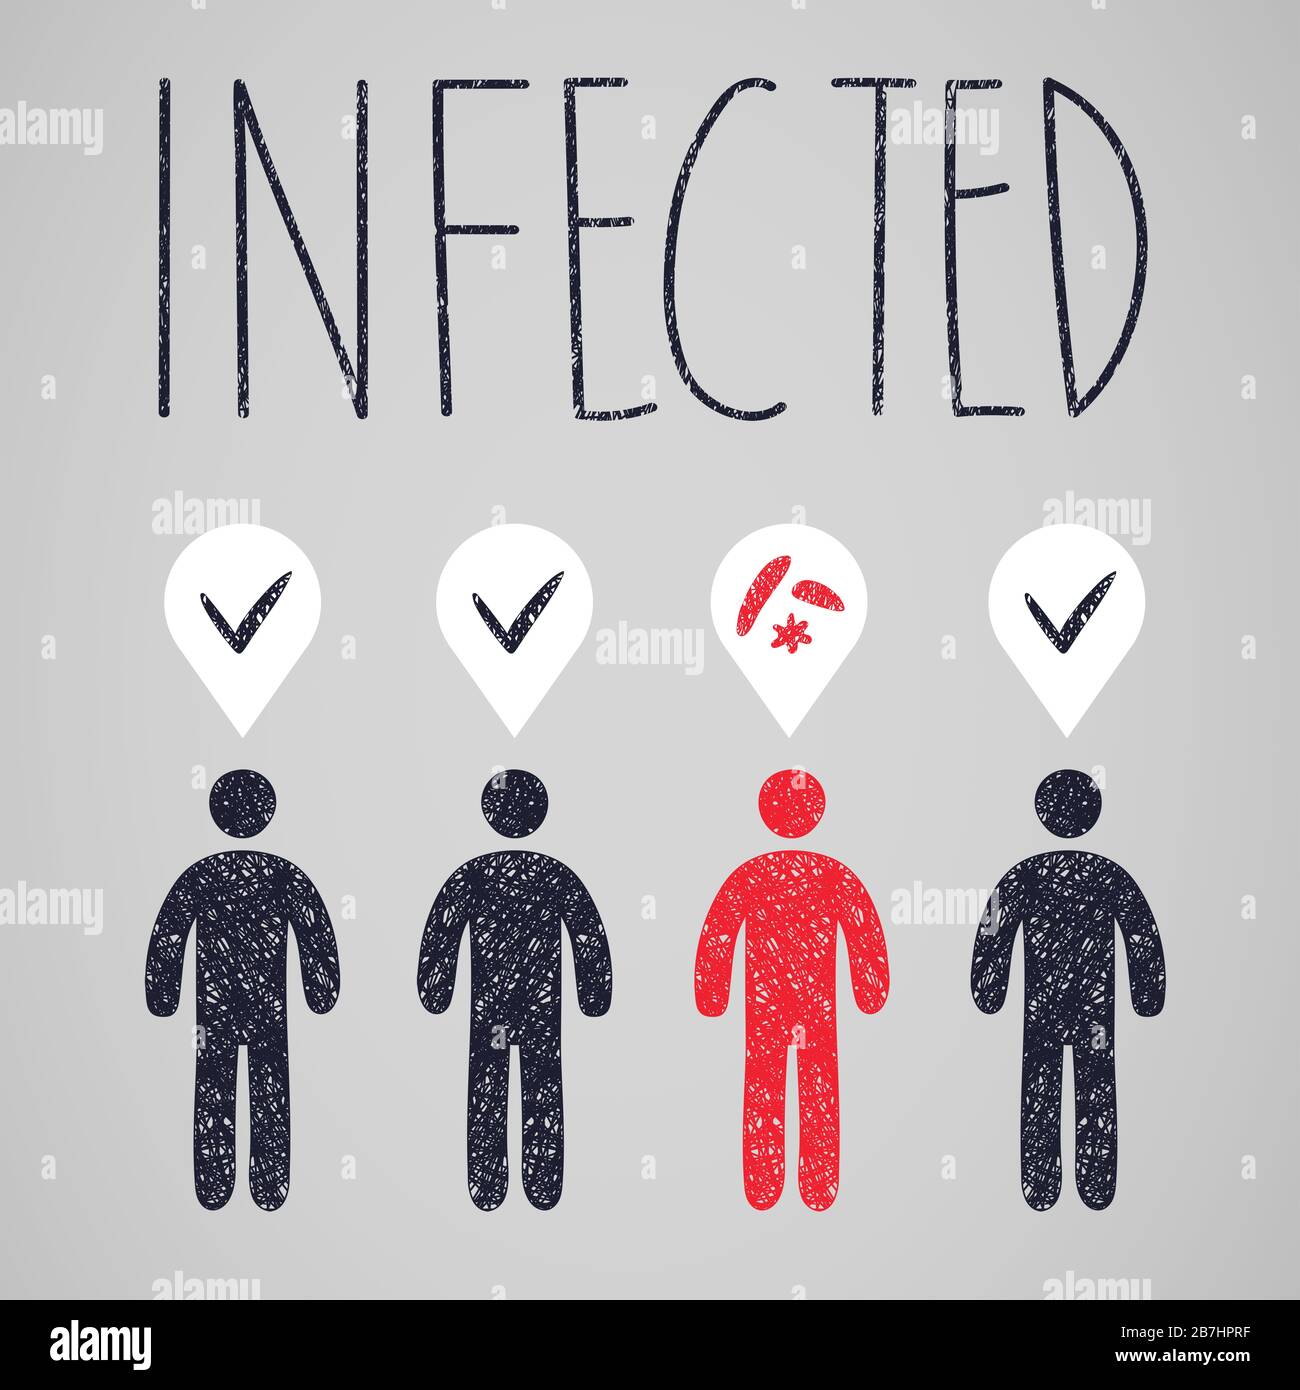 Creative illustration with infected red person among healthy ones Stock Photo